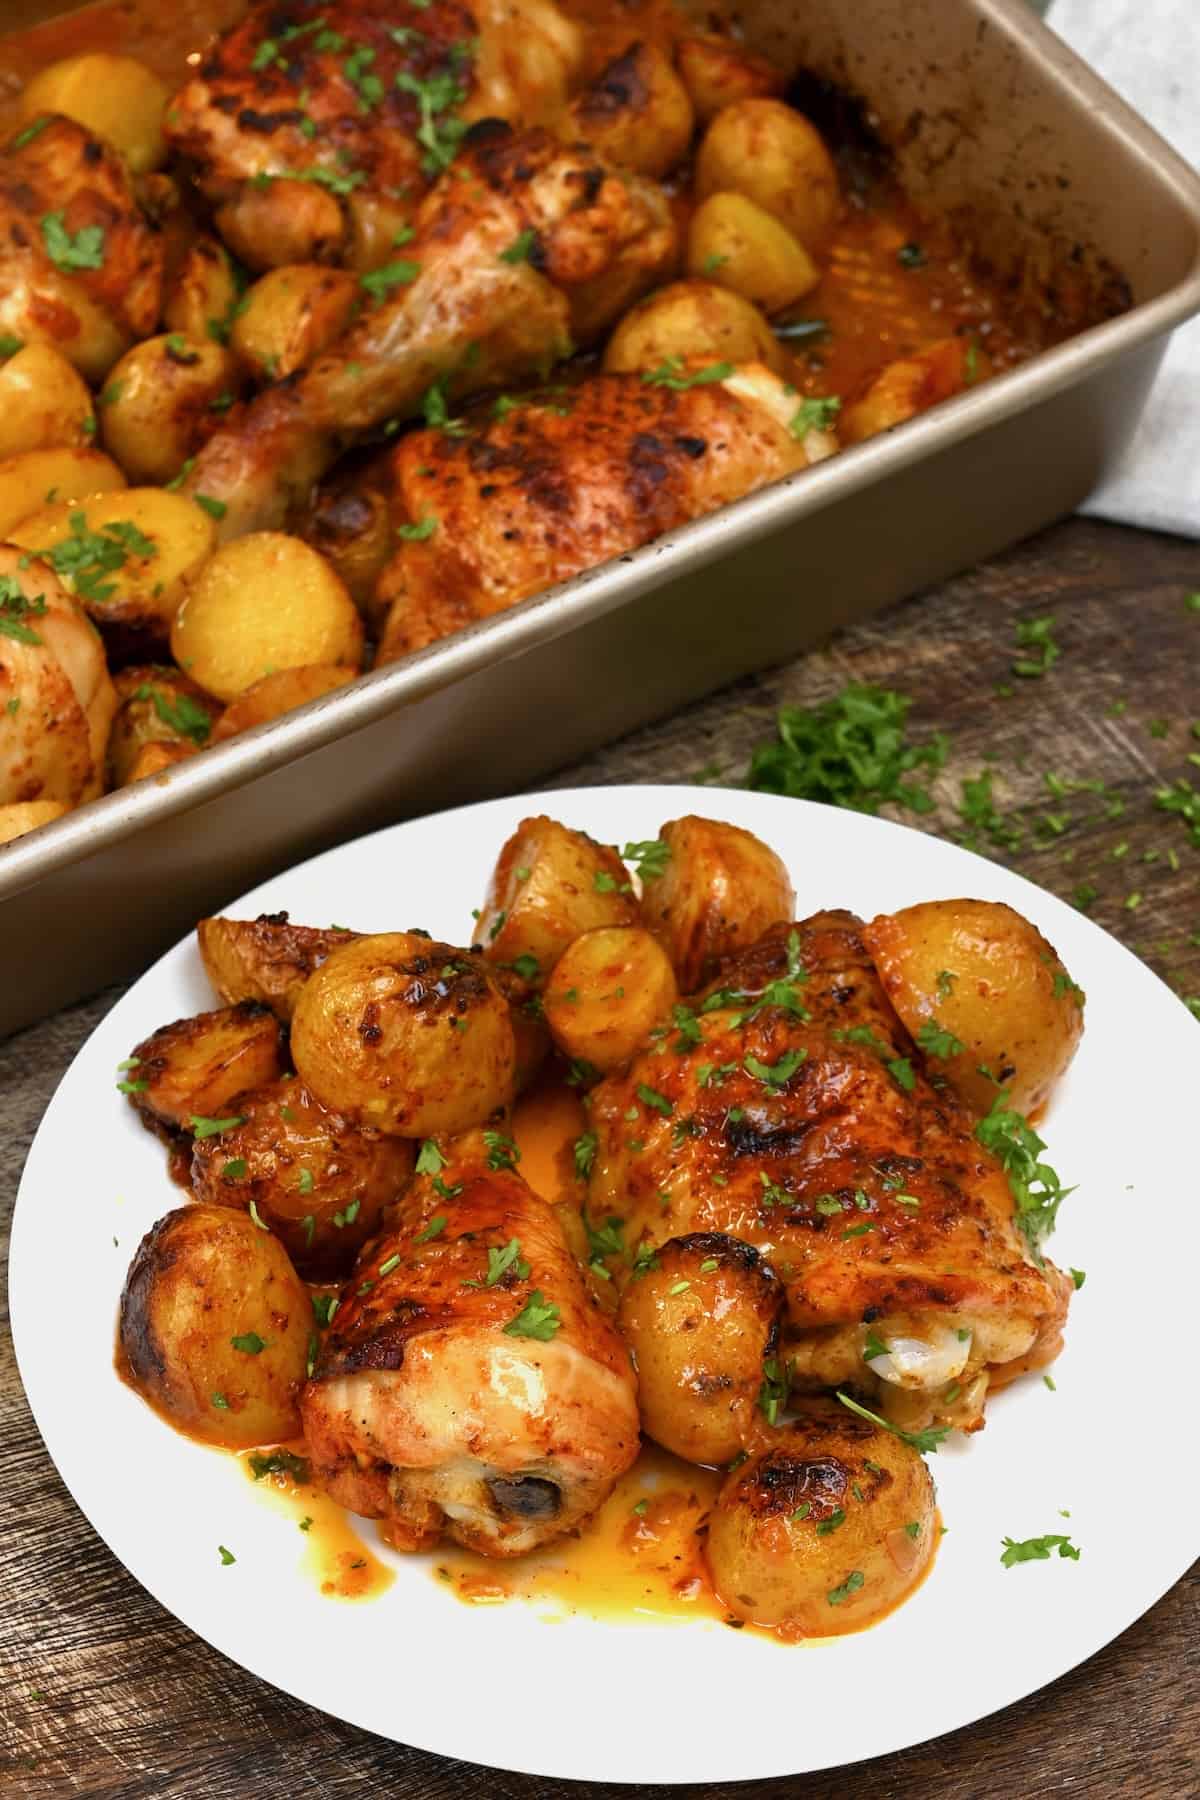 A serving of baked chicken and potatoes